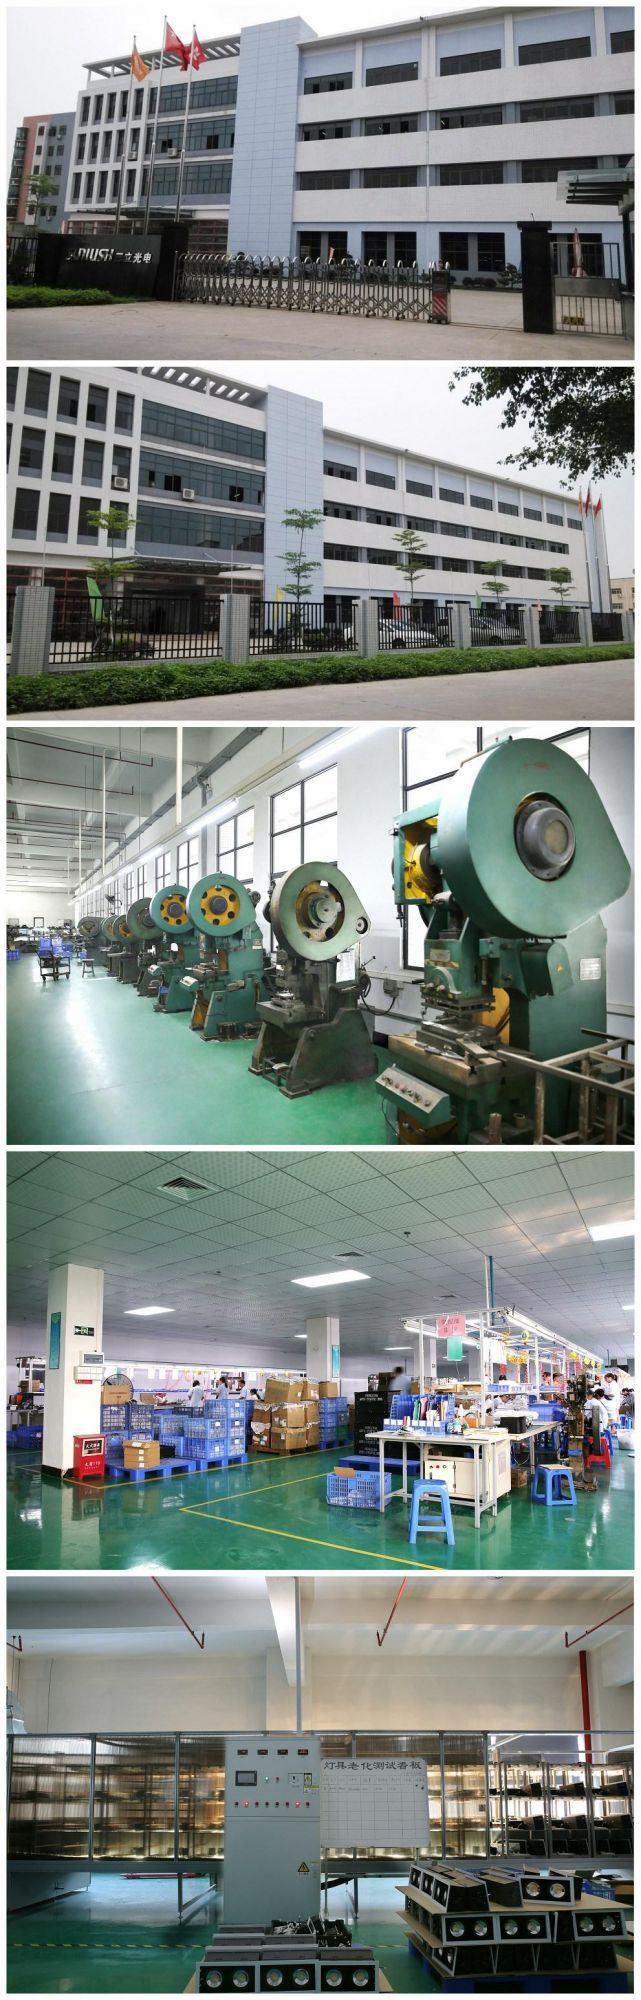 Chinese Factory Manufactured High Quality with Competitive Price LED Spot Light 5 Years Warranty Downlights